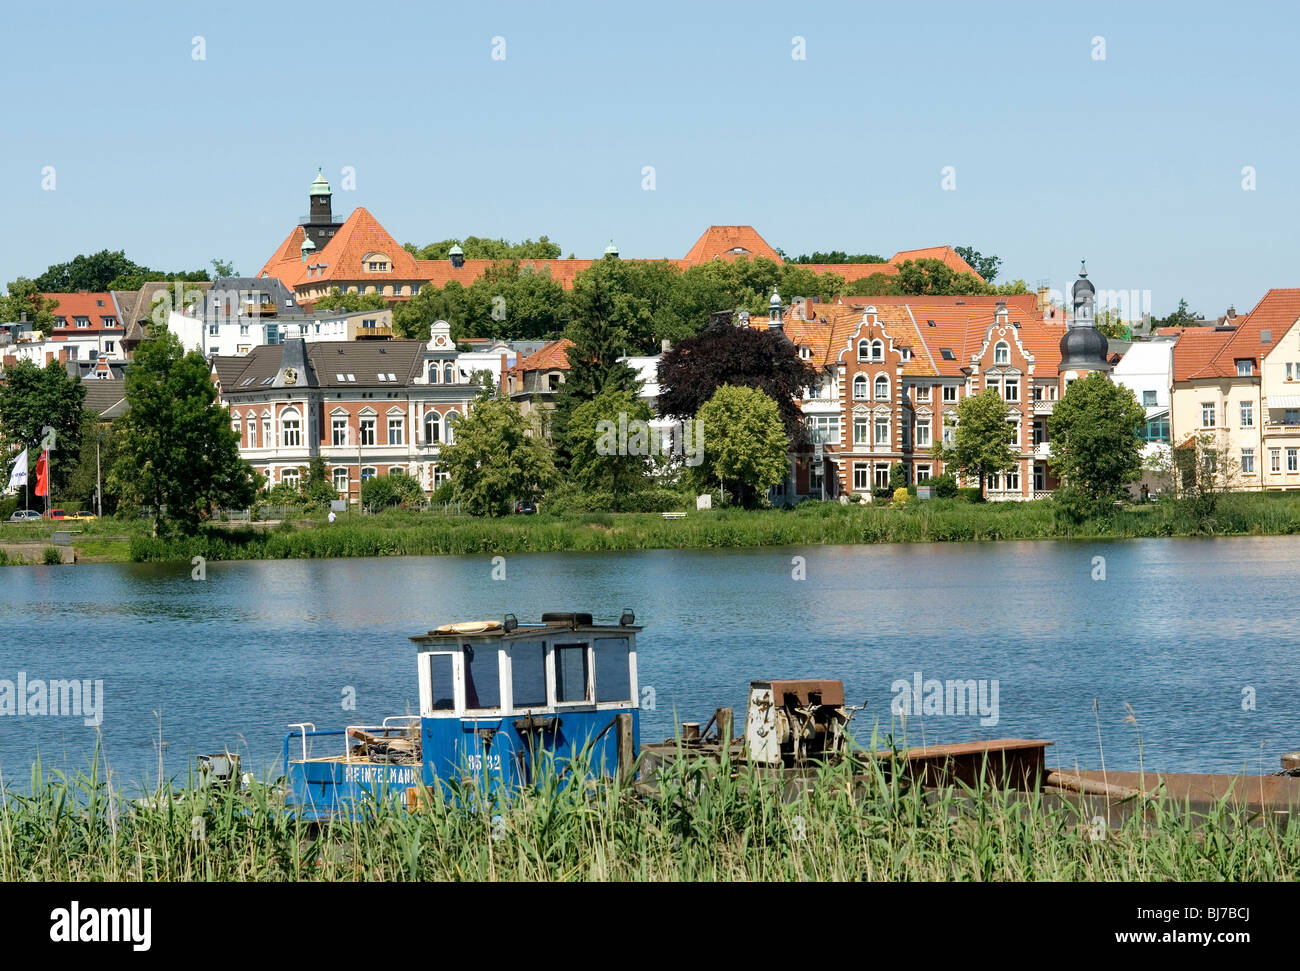 Townscape of Schwerin, Germany Stock Photo